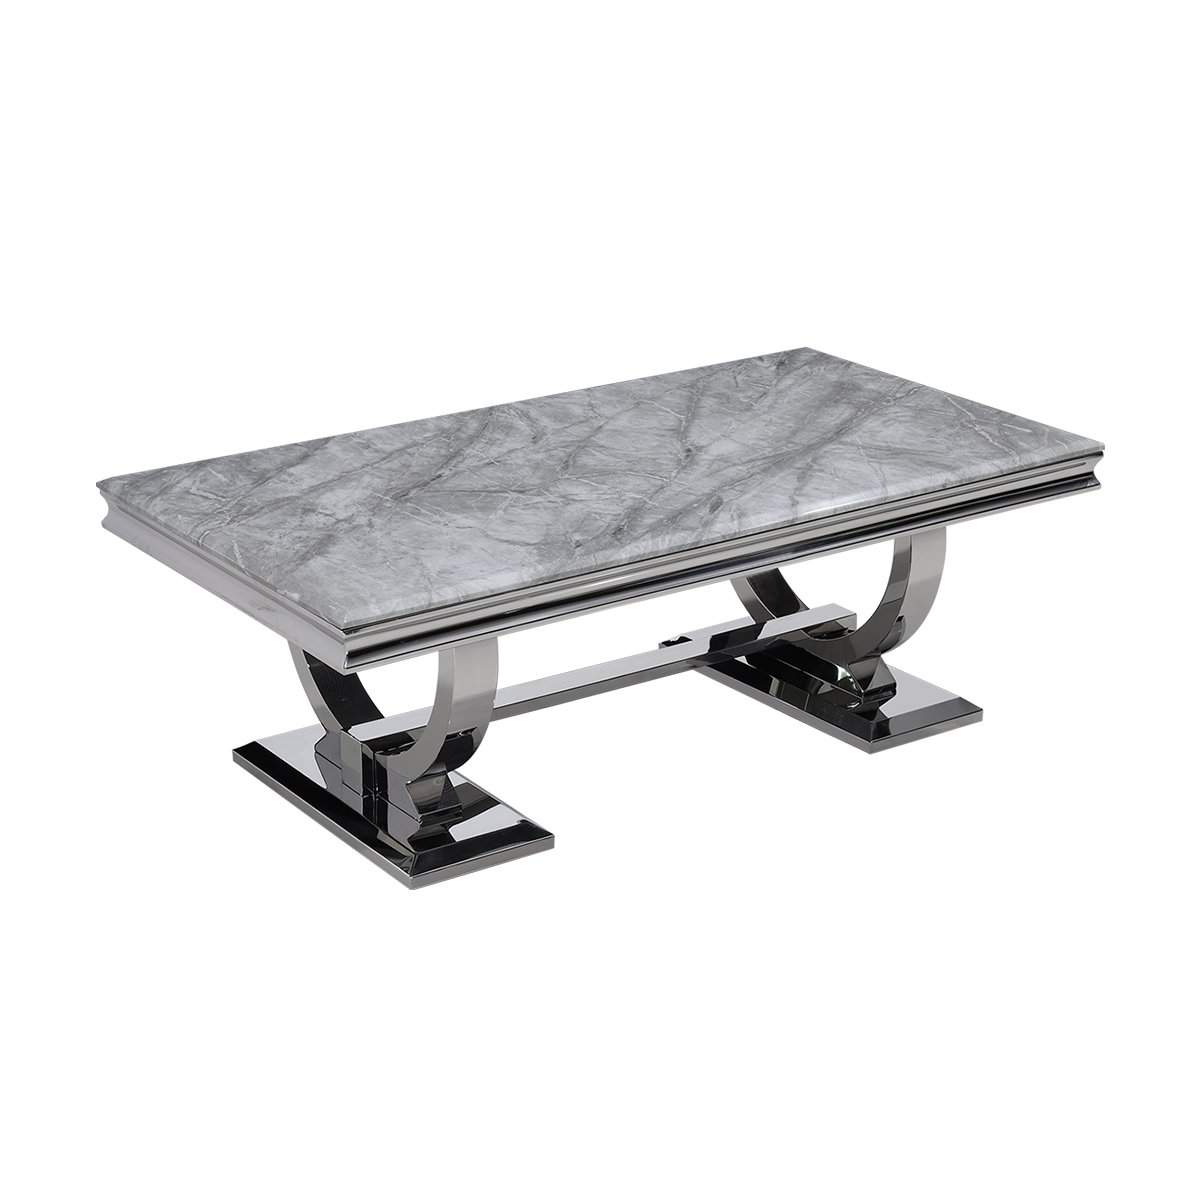 Rectangular Modern Gray Coffee Table Faux Marble & Stainless Steel-Richsoul-Coffee Tables,Furniture,Living Room Furniture